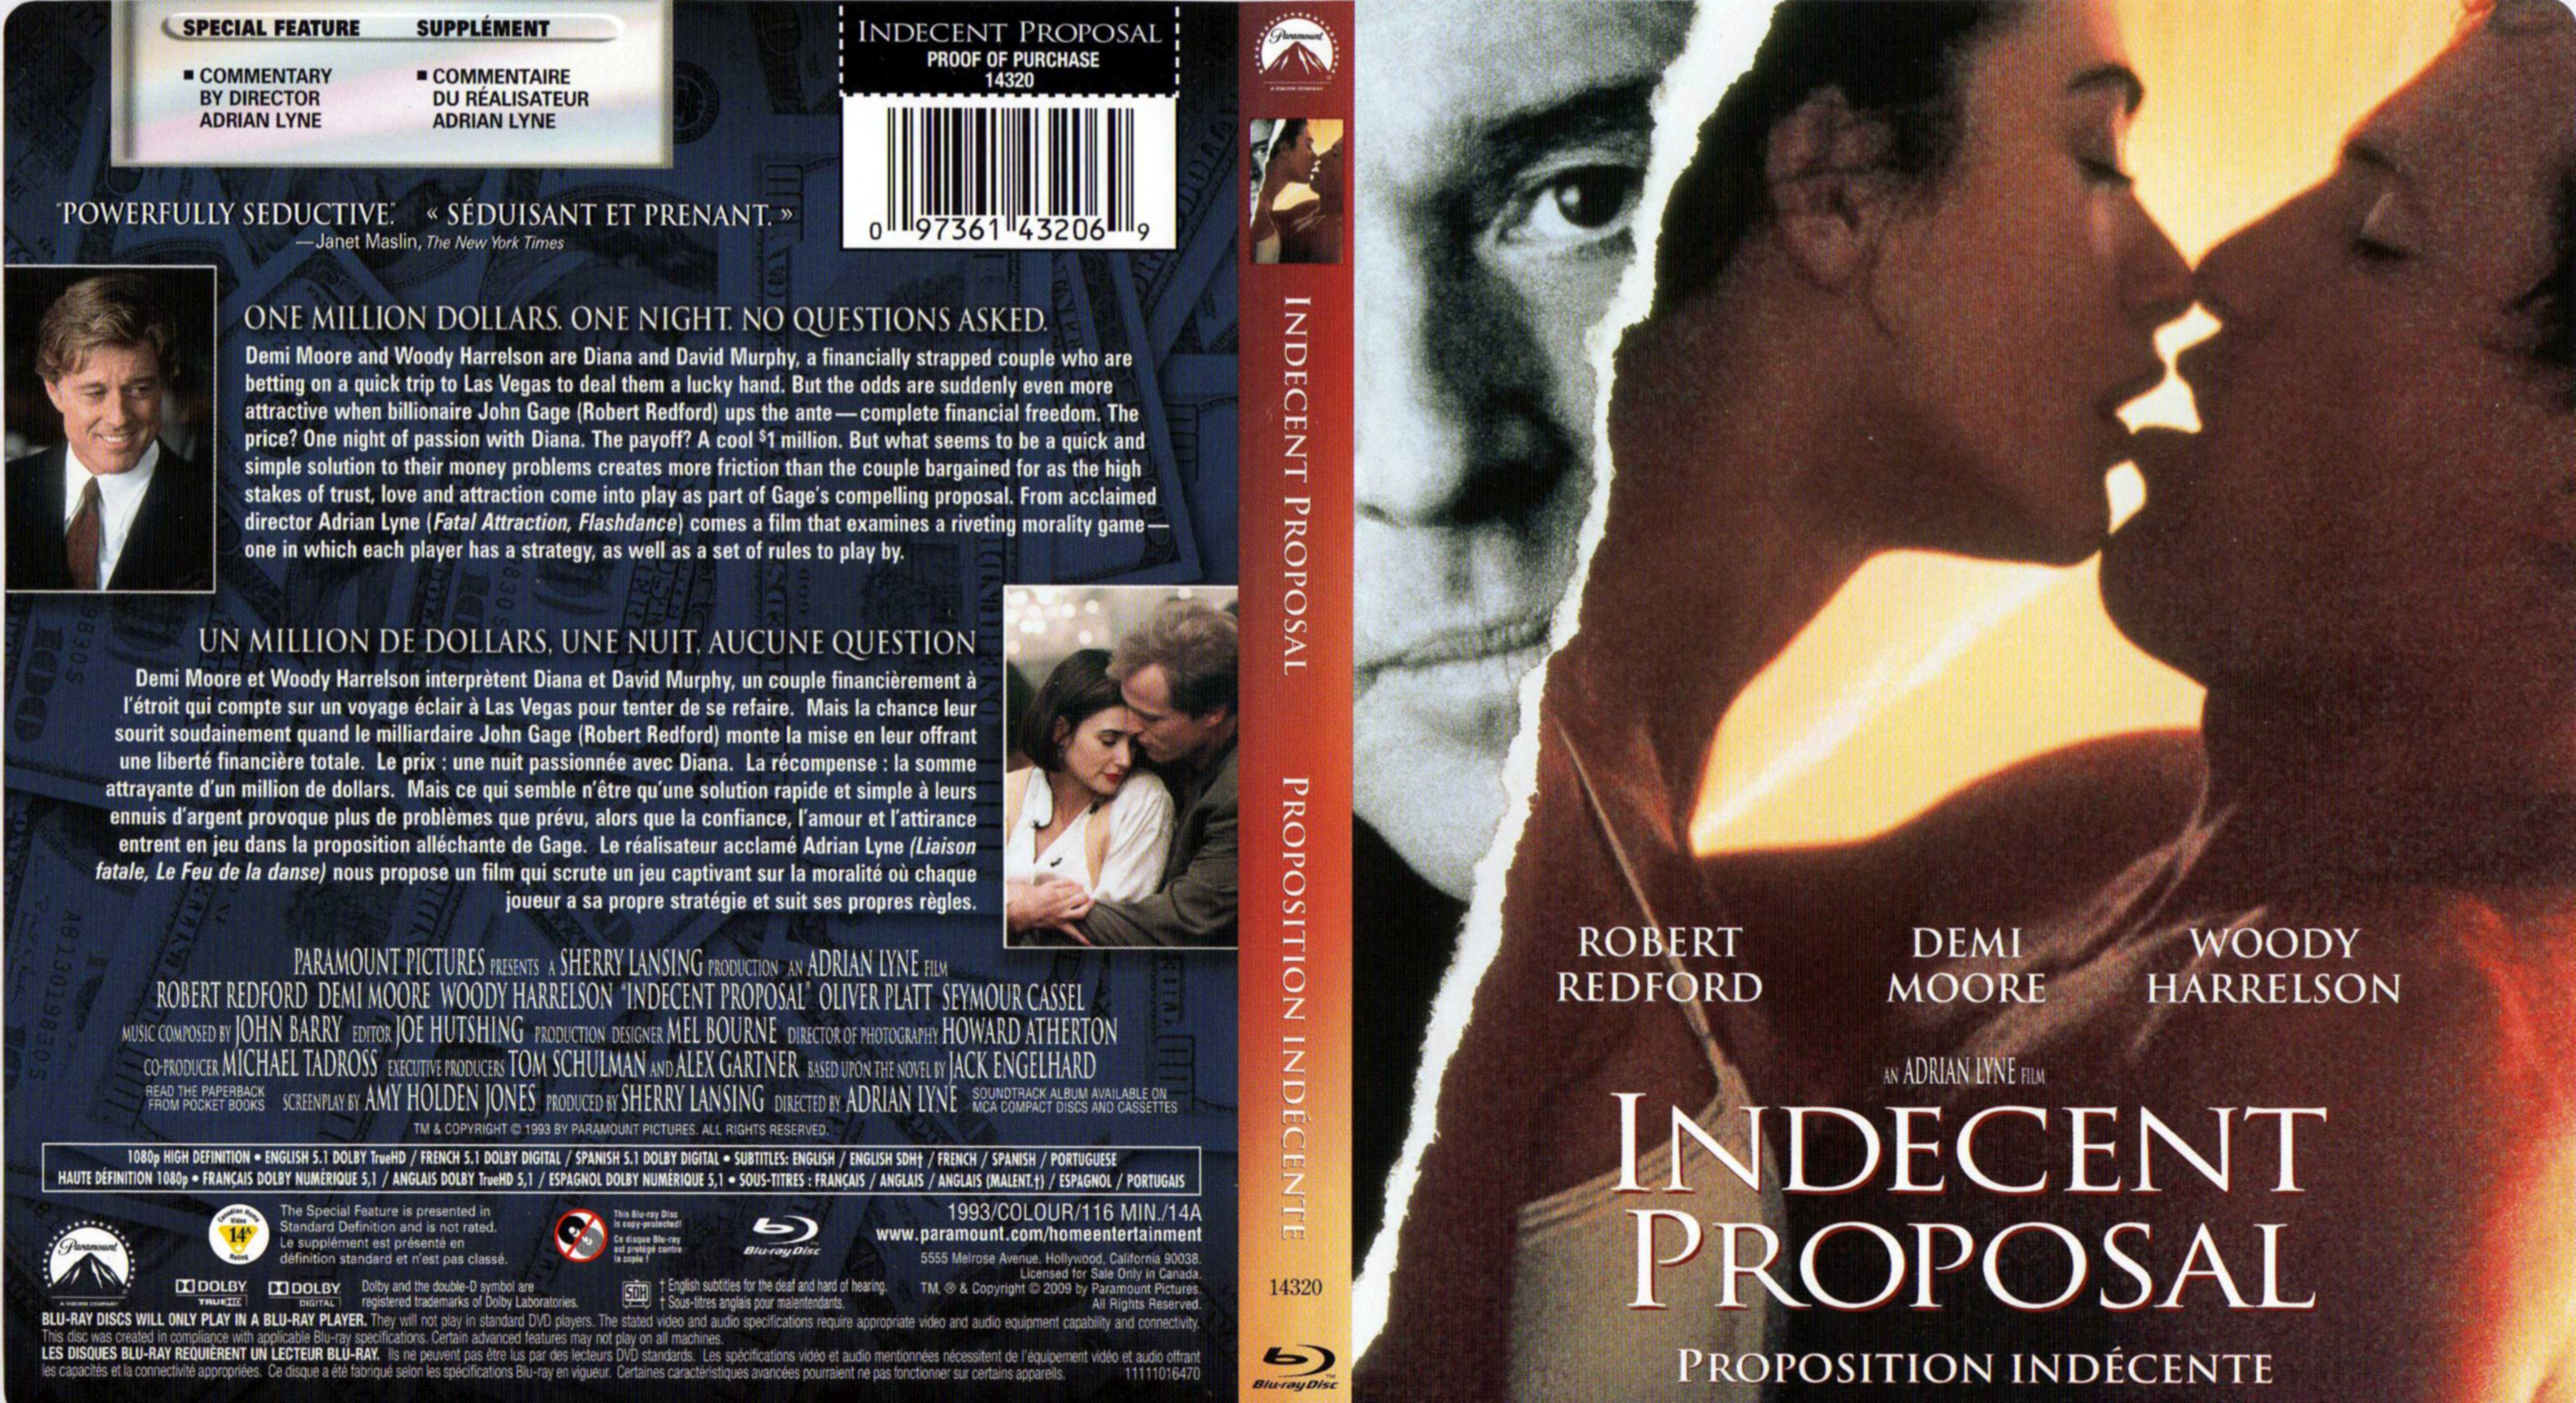 Jaquette DVD Proposition indcente - Indecent proposal (BLU-RAY) (Canadienne)